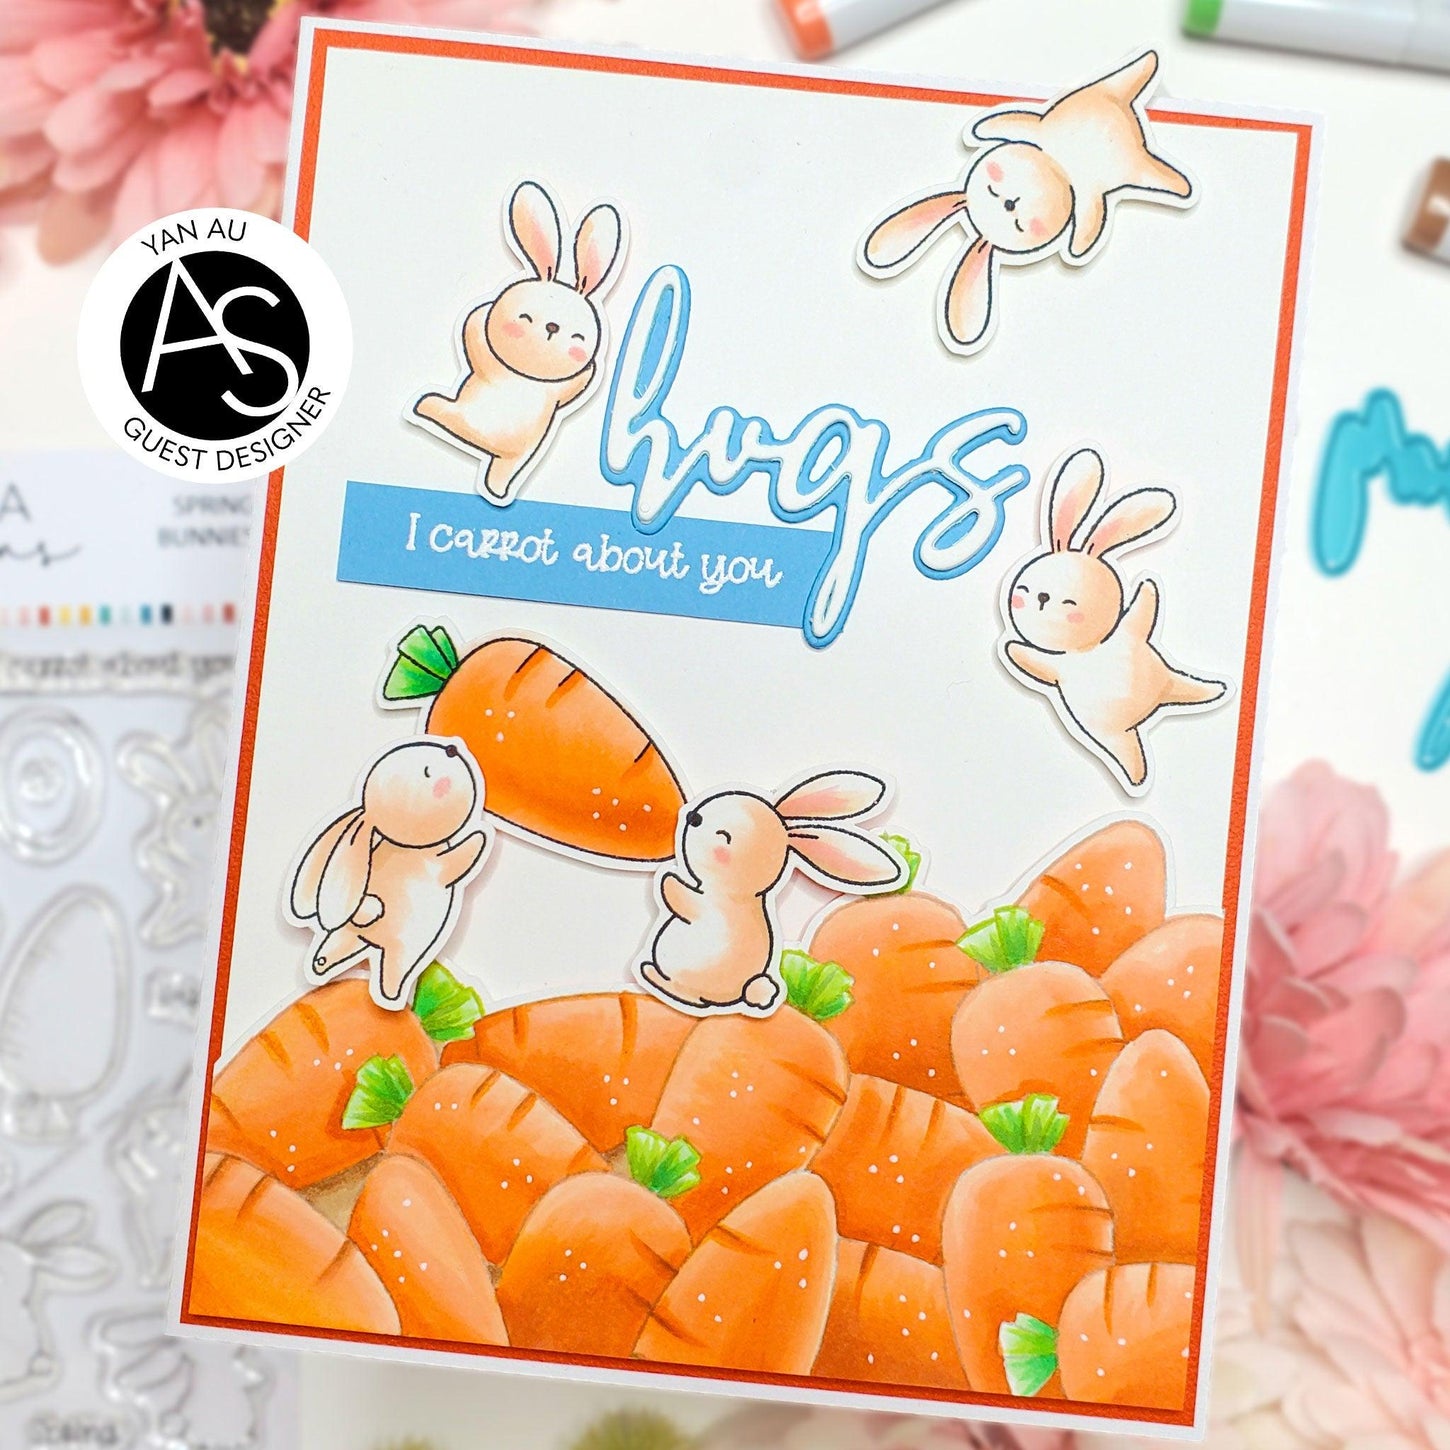 alex-syberia-designs-spring-bunny-stamp-egg-easter-happy-spring-dies-carrot-cardmaking-handmadecards-flowers-colouring-hugs-sentiments